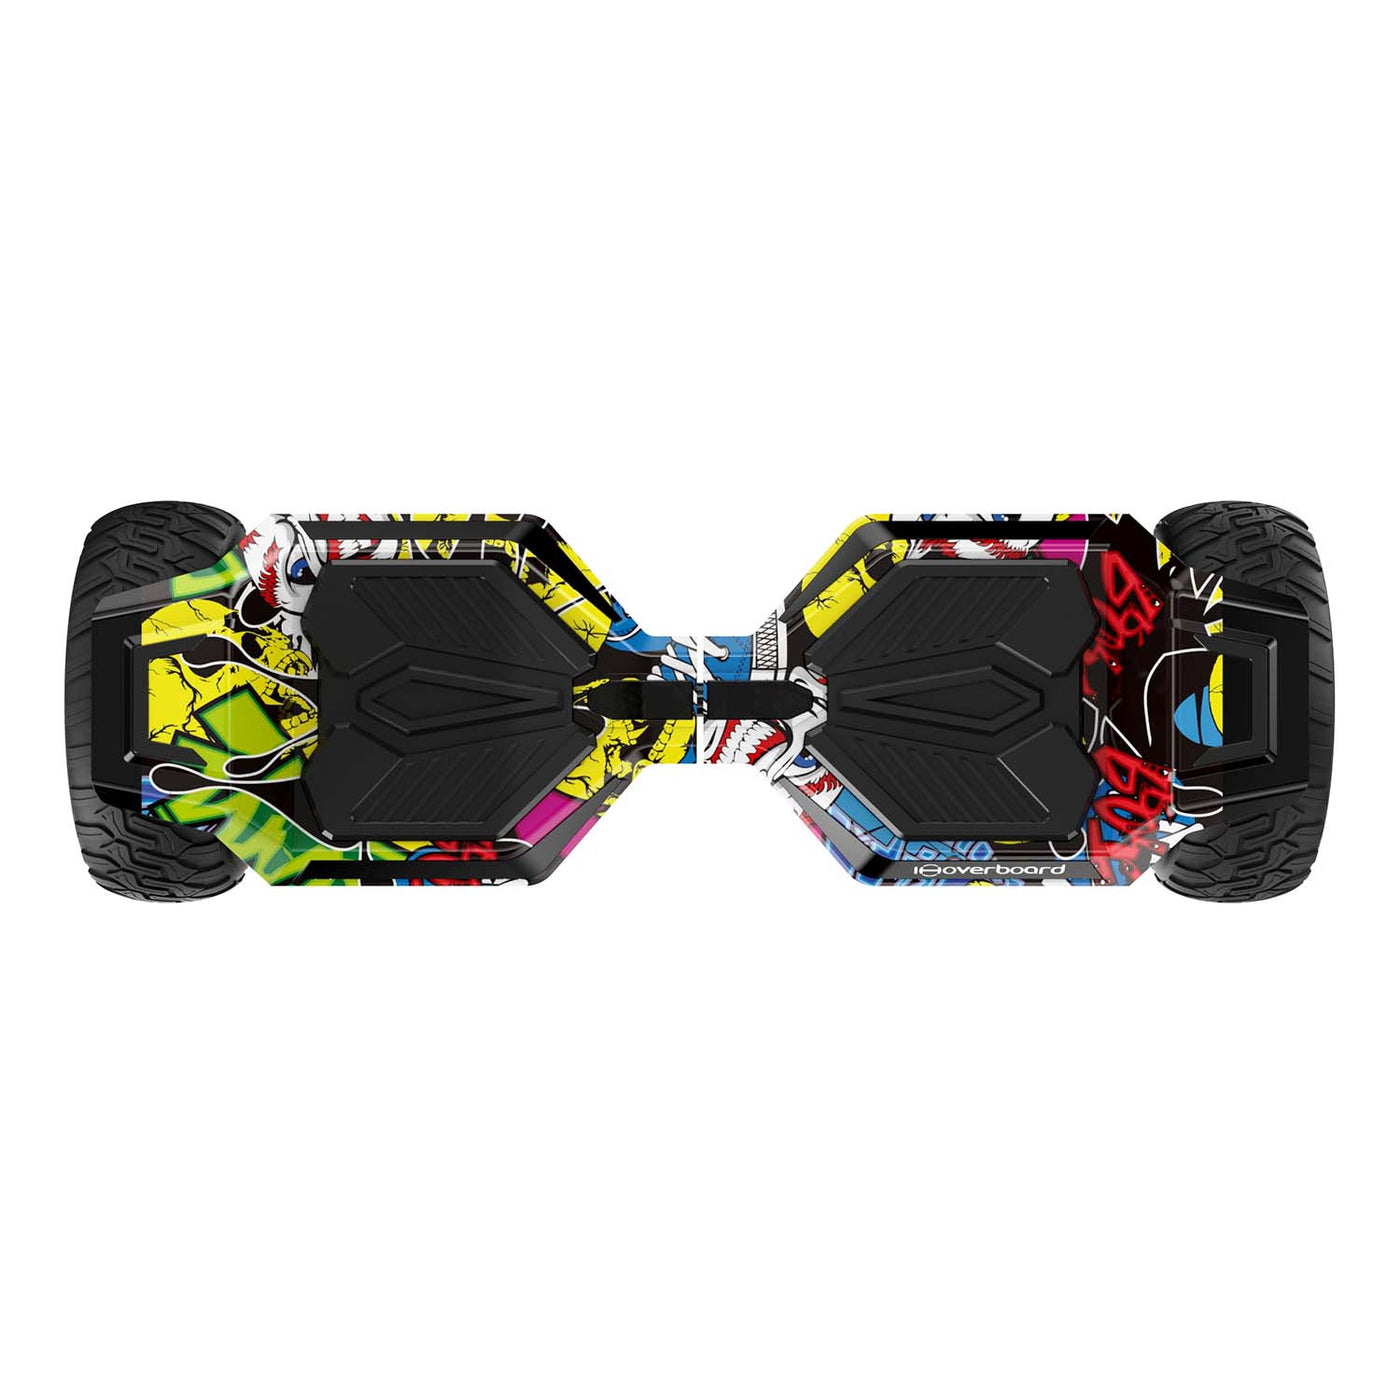 iHoverboard H8 Yellow Off Road Hoverboard 8.5"